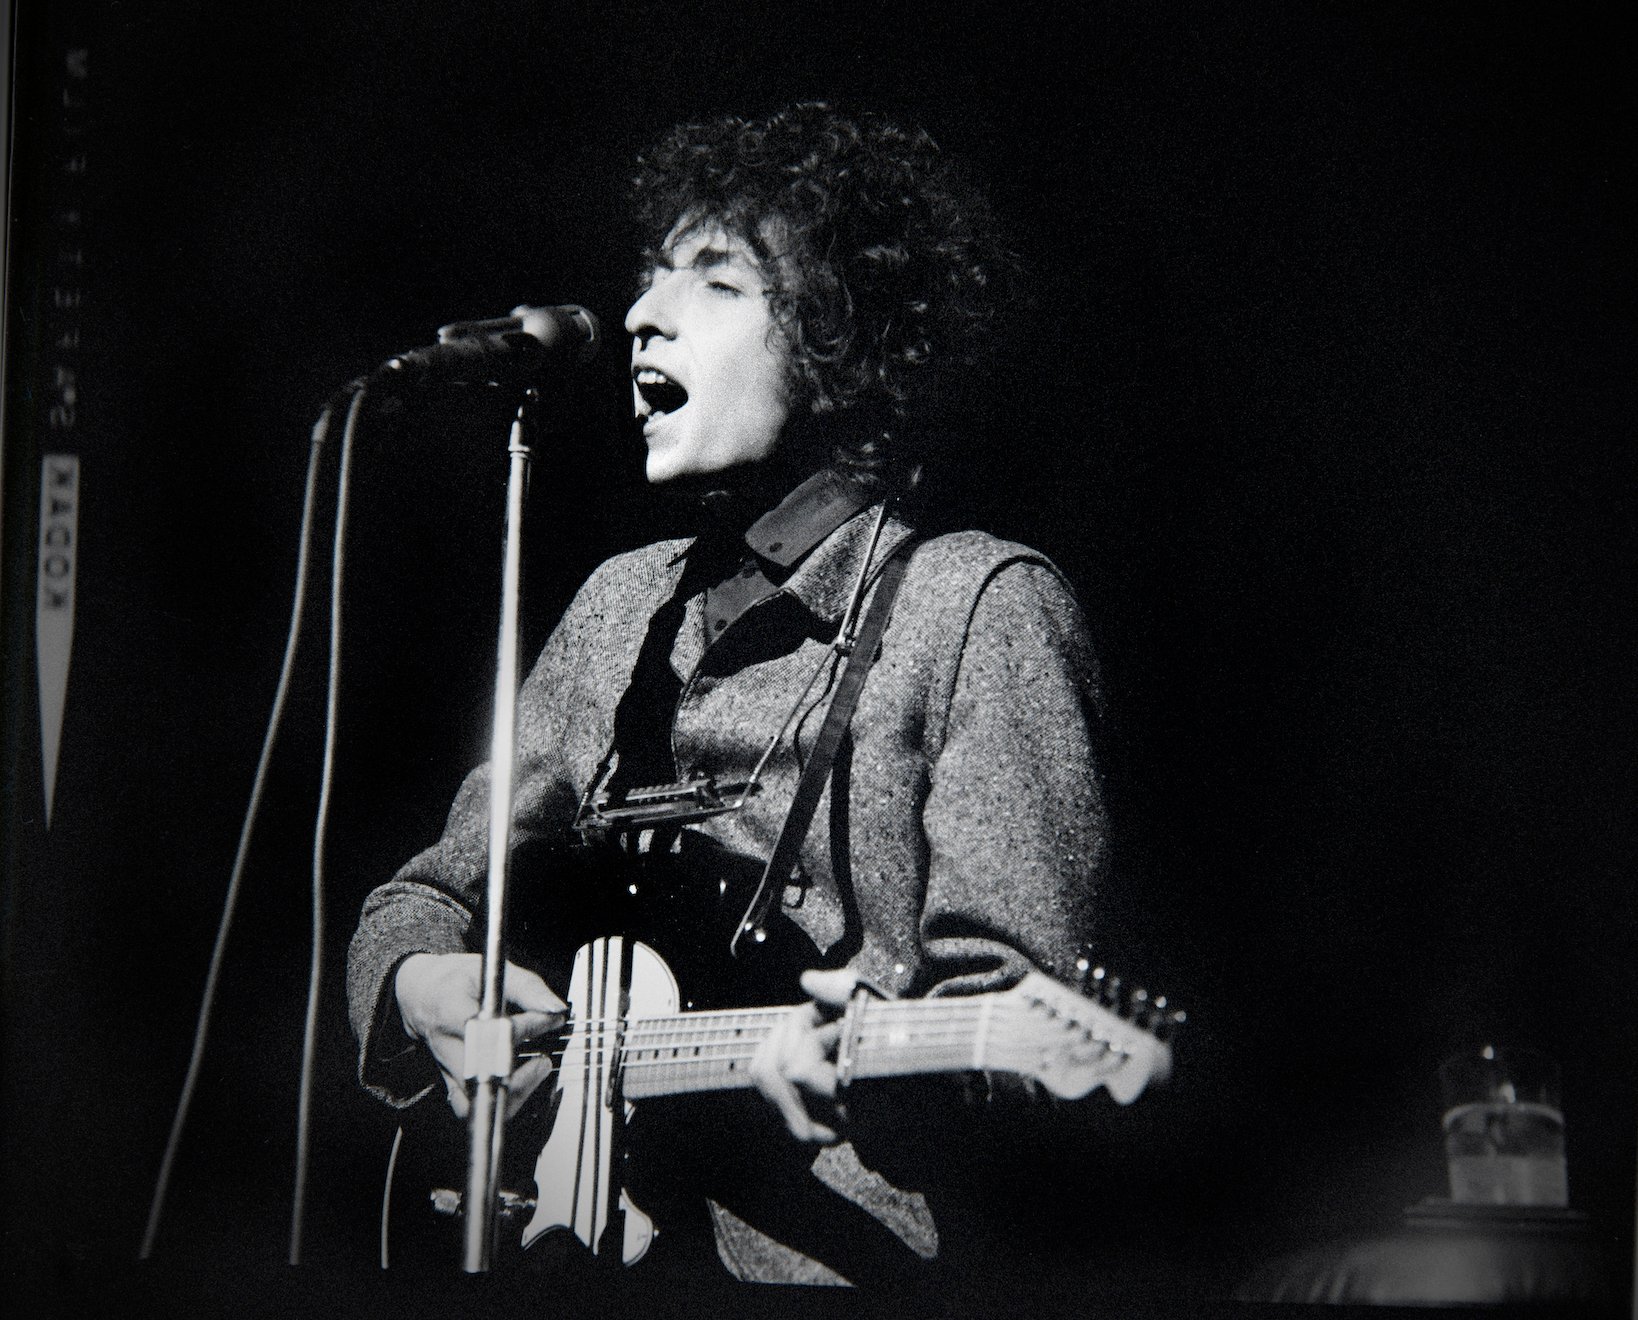 Bob Dylan performs at the Academy of Music in Philadelphia, PA, in 1966